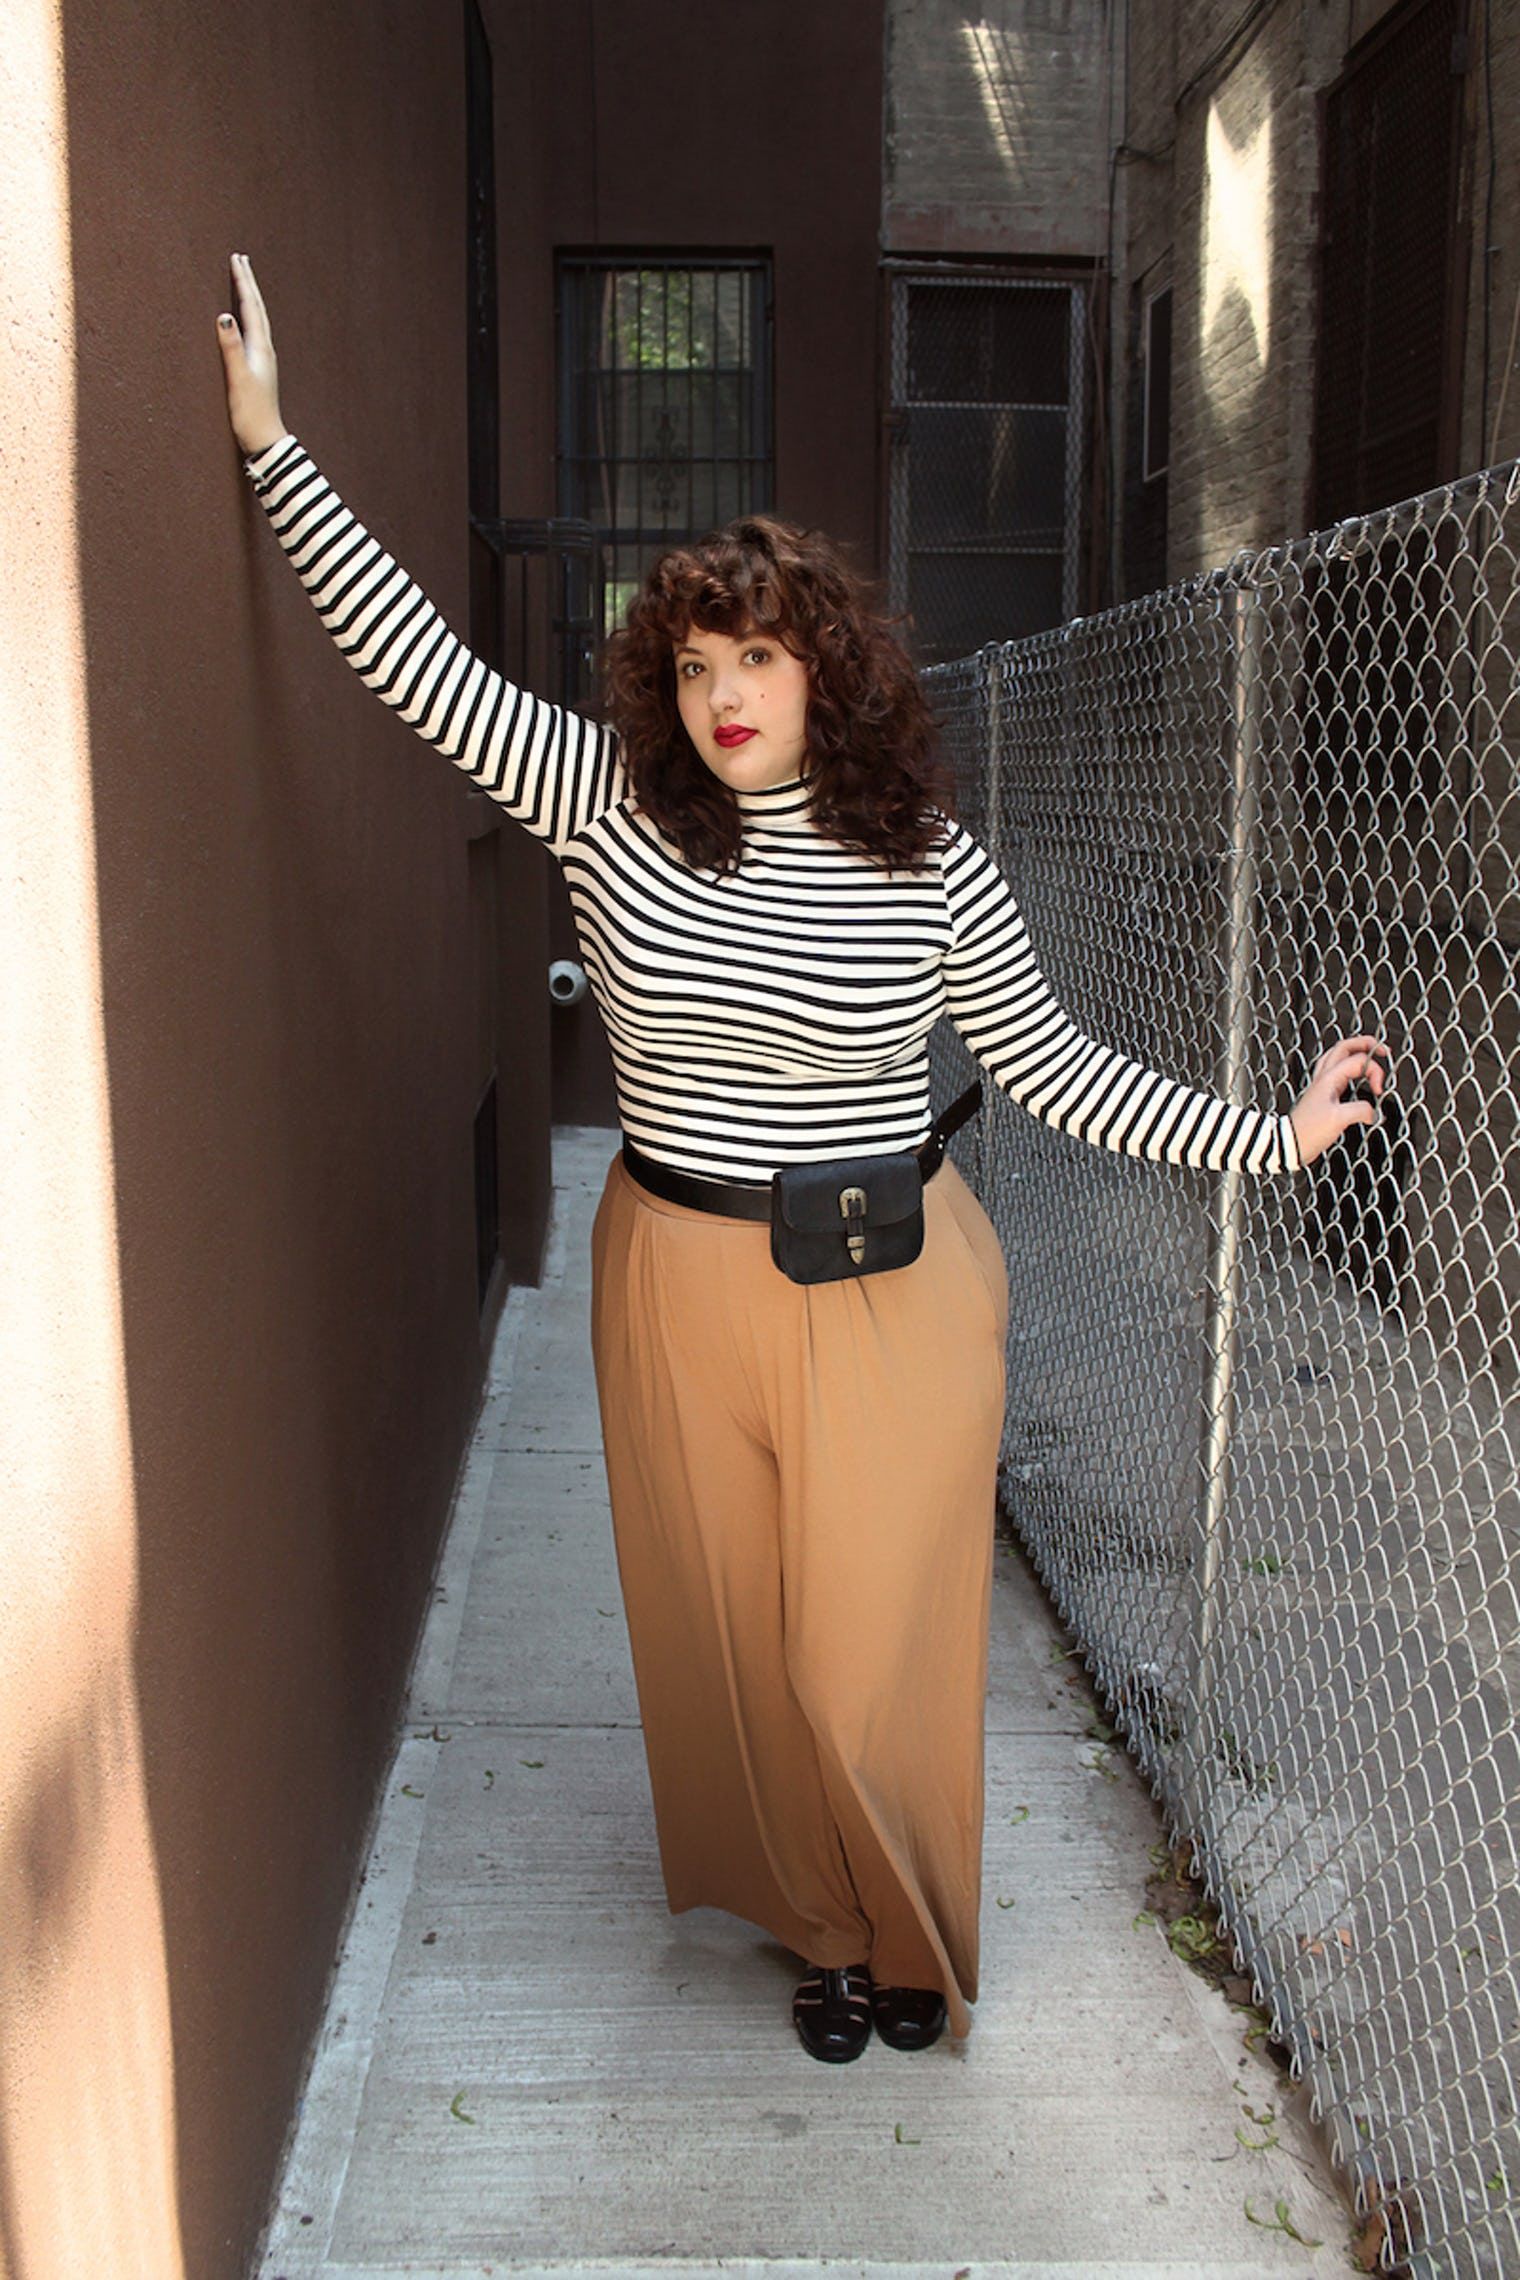 9 Outfits That Prove Plus Size Women Can Wear Any "Trend" Because Fashion Has No Size Limit